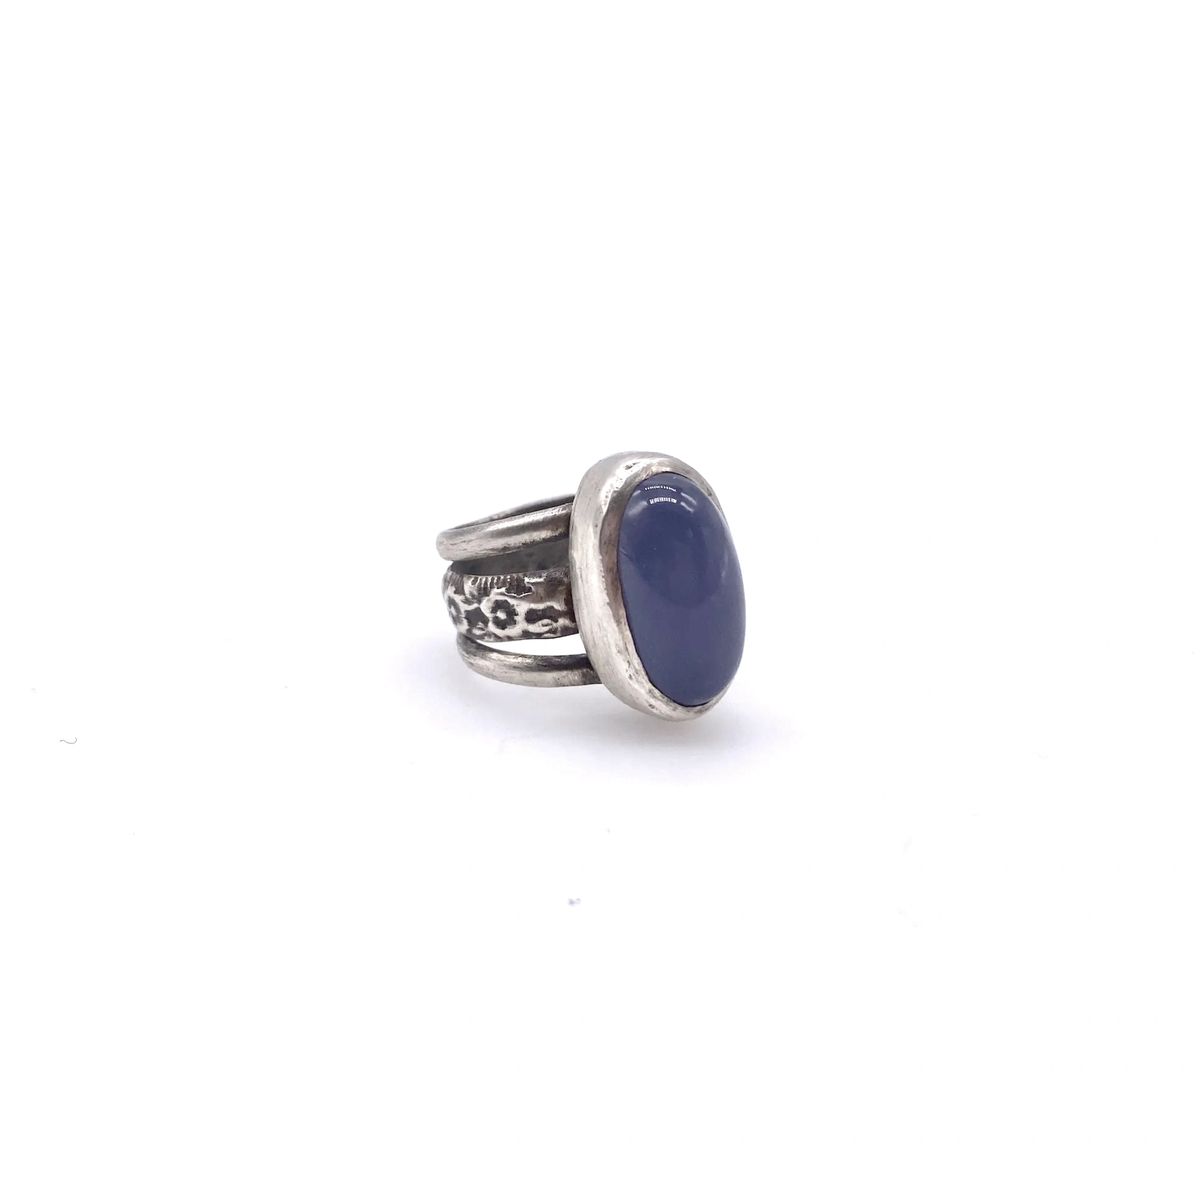 Abyssinian Blue Chalcedony Silver Ring